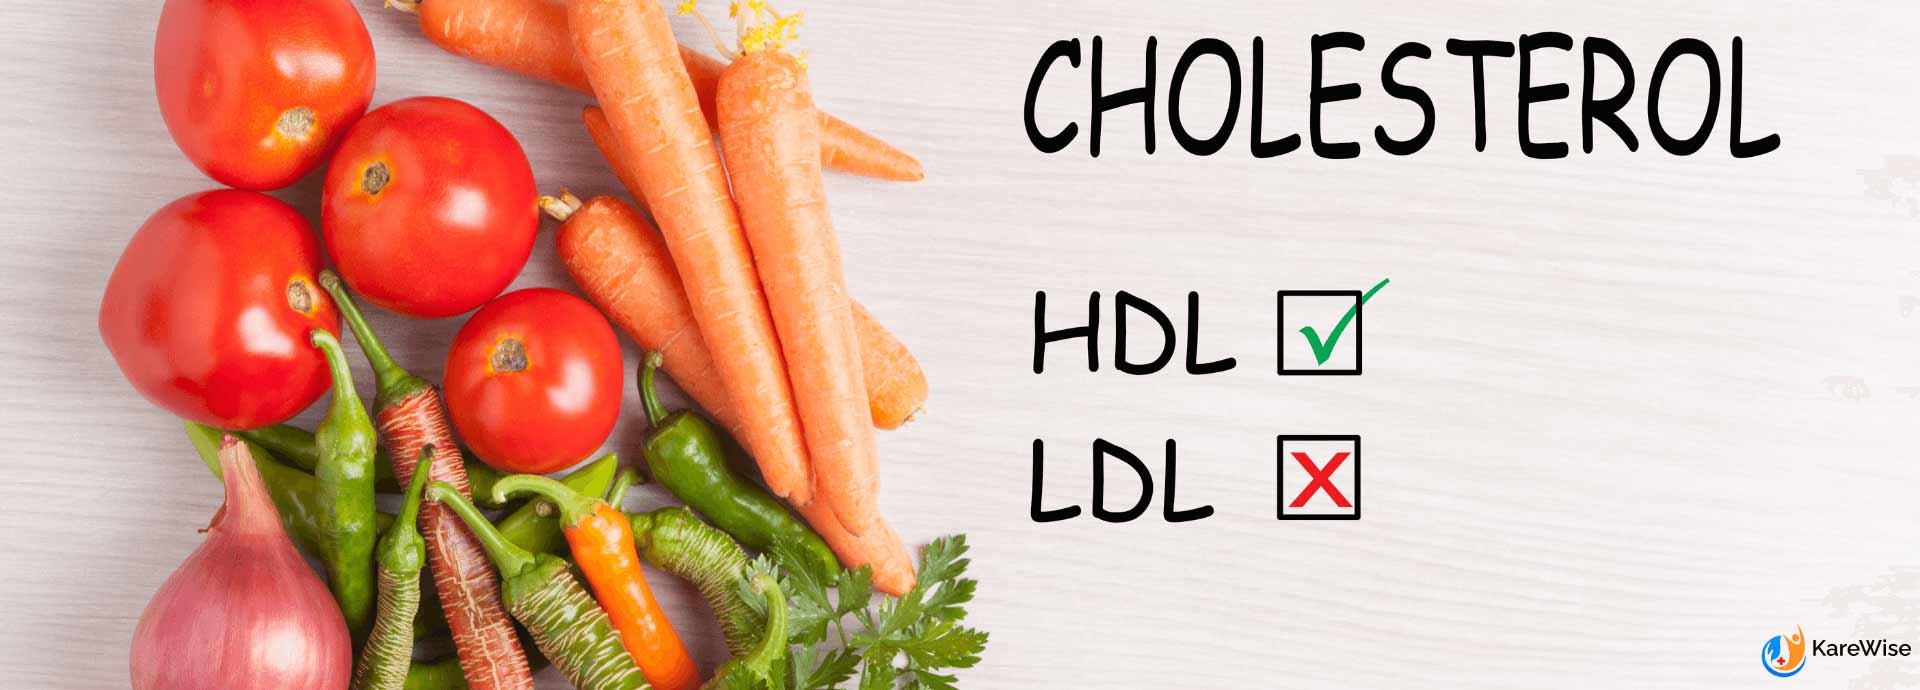 How Do You Keep Your Cholesterol Levels Lower?